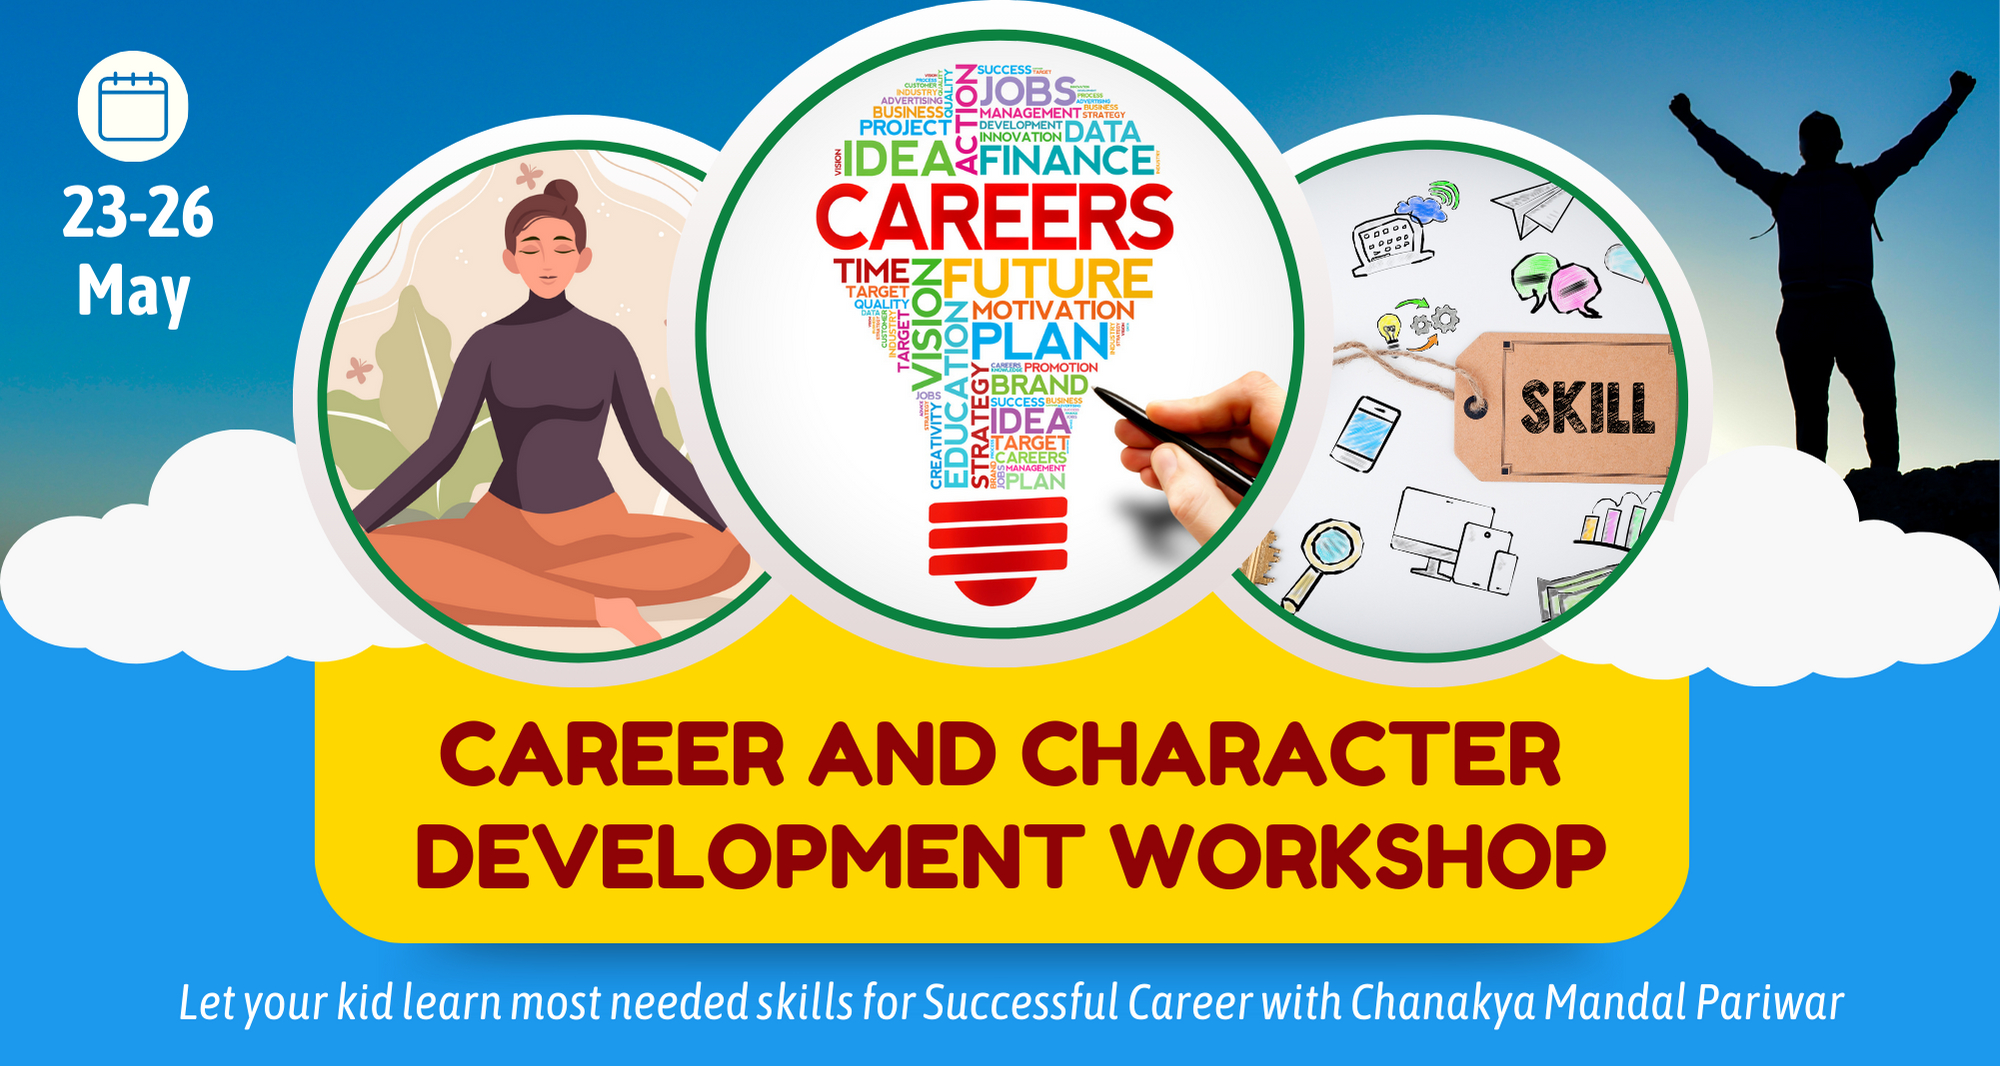 Let your kid learn most needed skills for Successful Career with Chanakya Mandal Pariwar